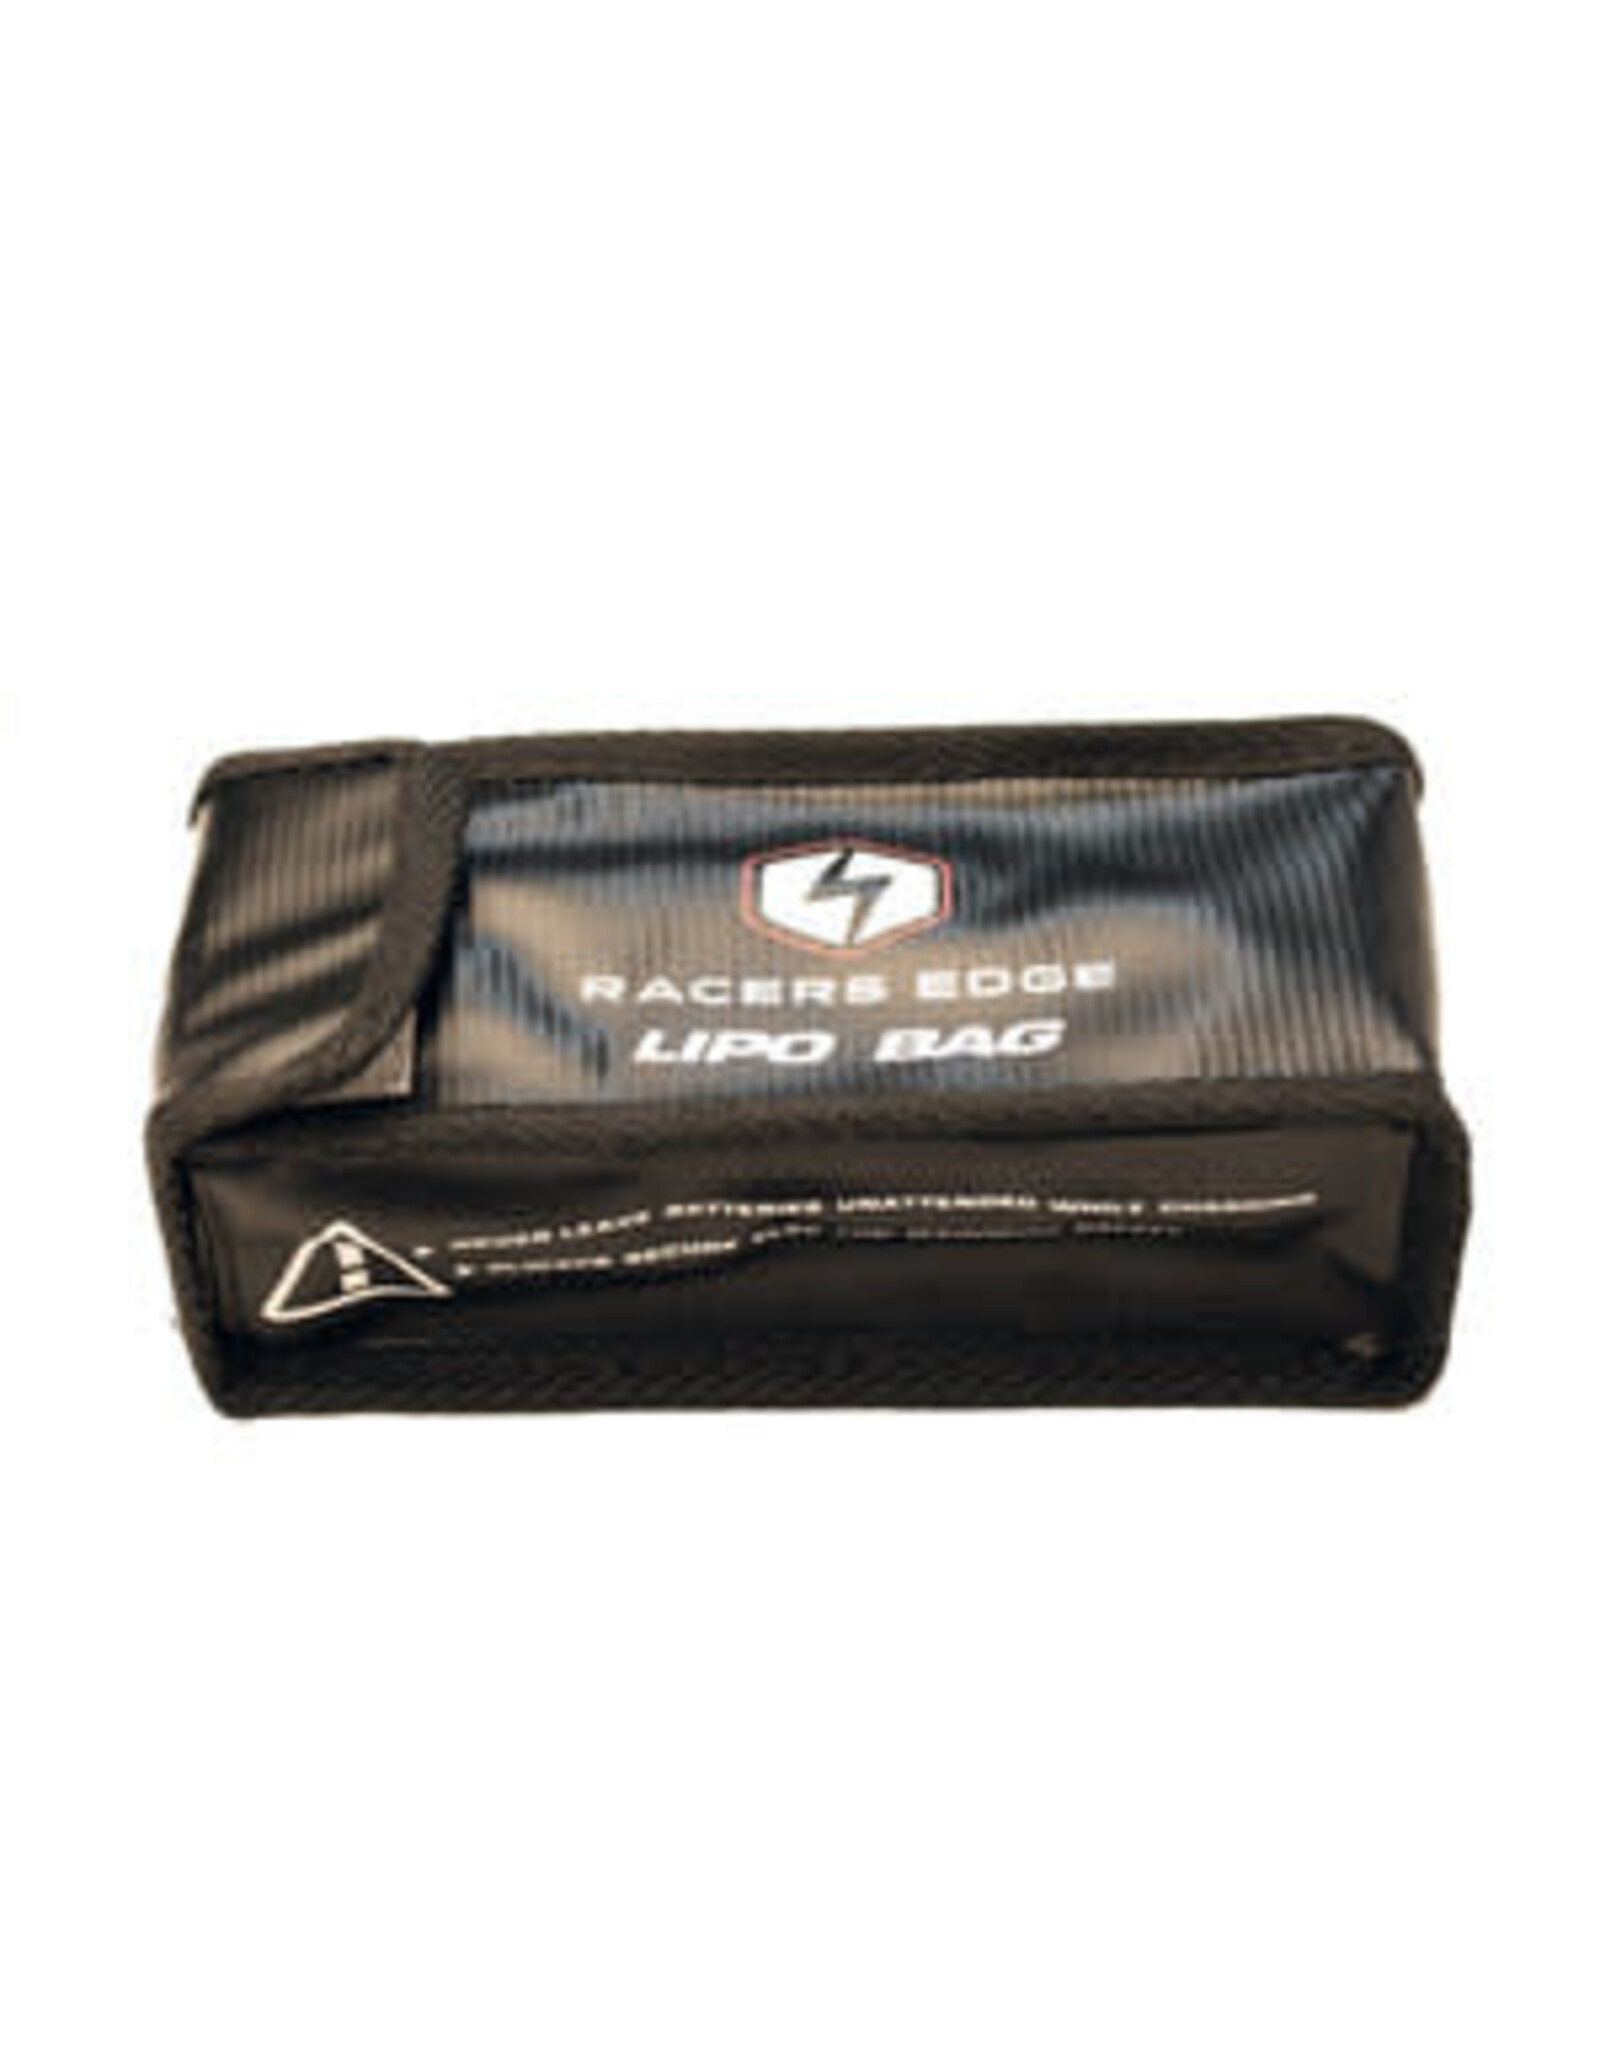 Racers Edge Lipo Battery Charging Safety Bag (up to 6S)